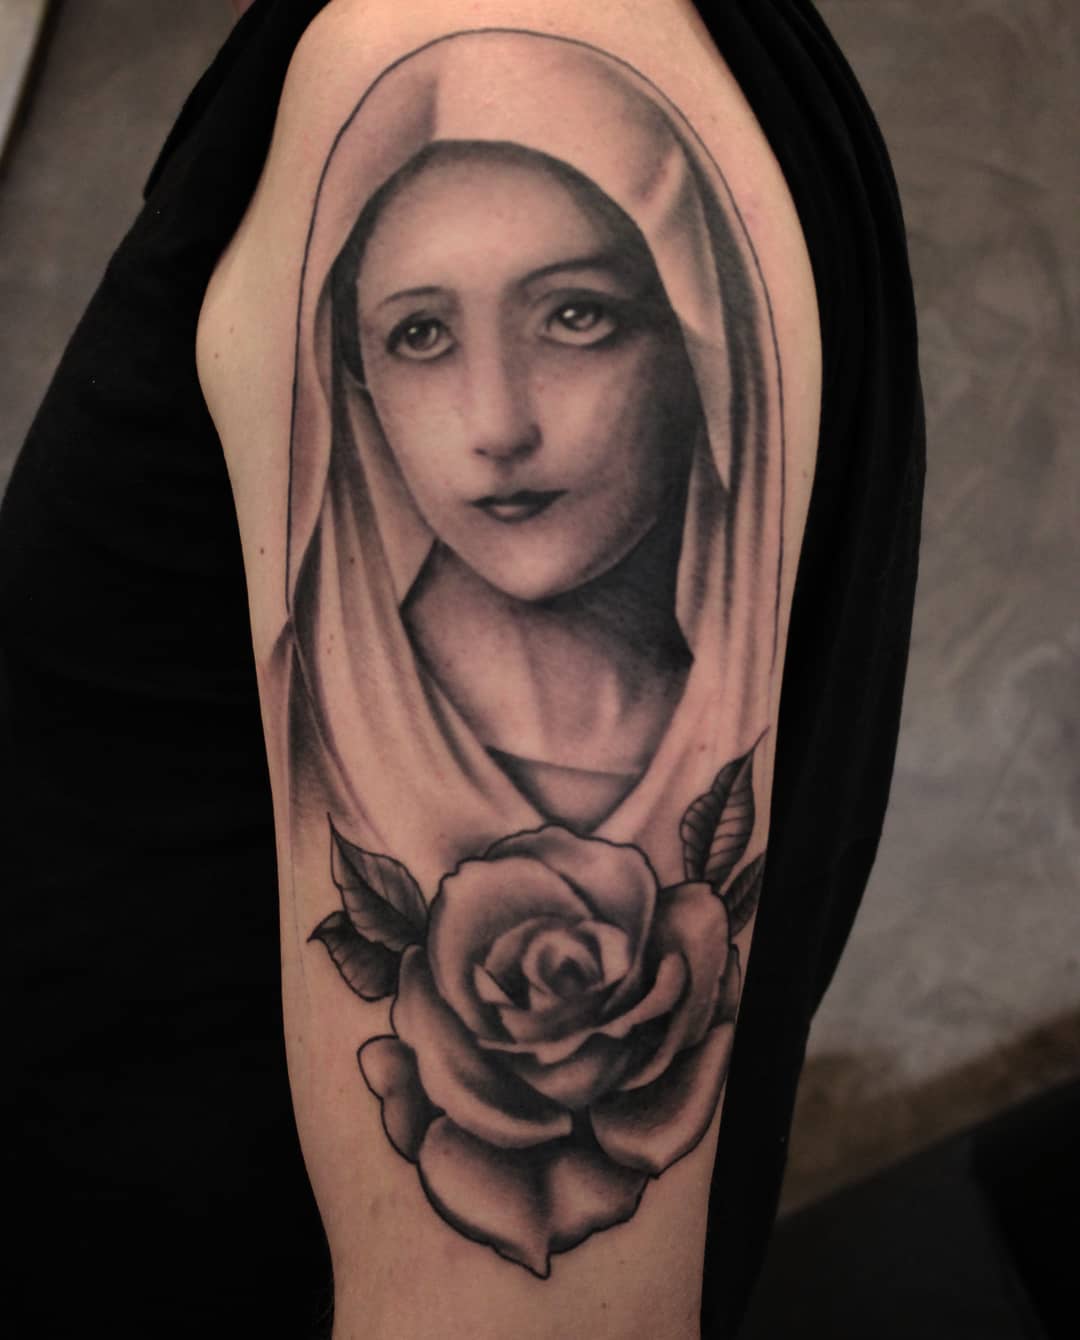 Classic one from today, thank you so much for the trust
#germantattooers #tattoo